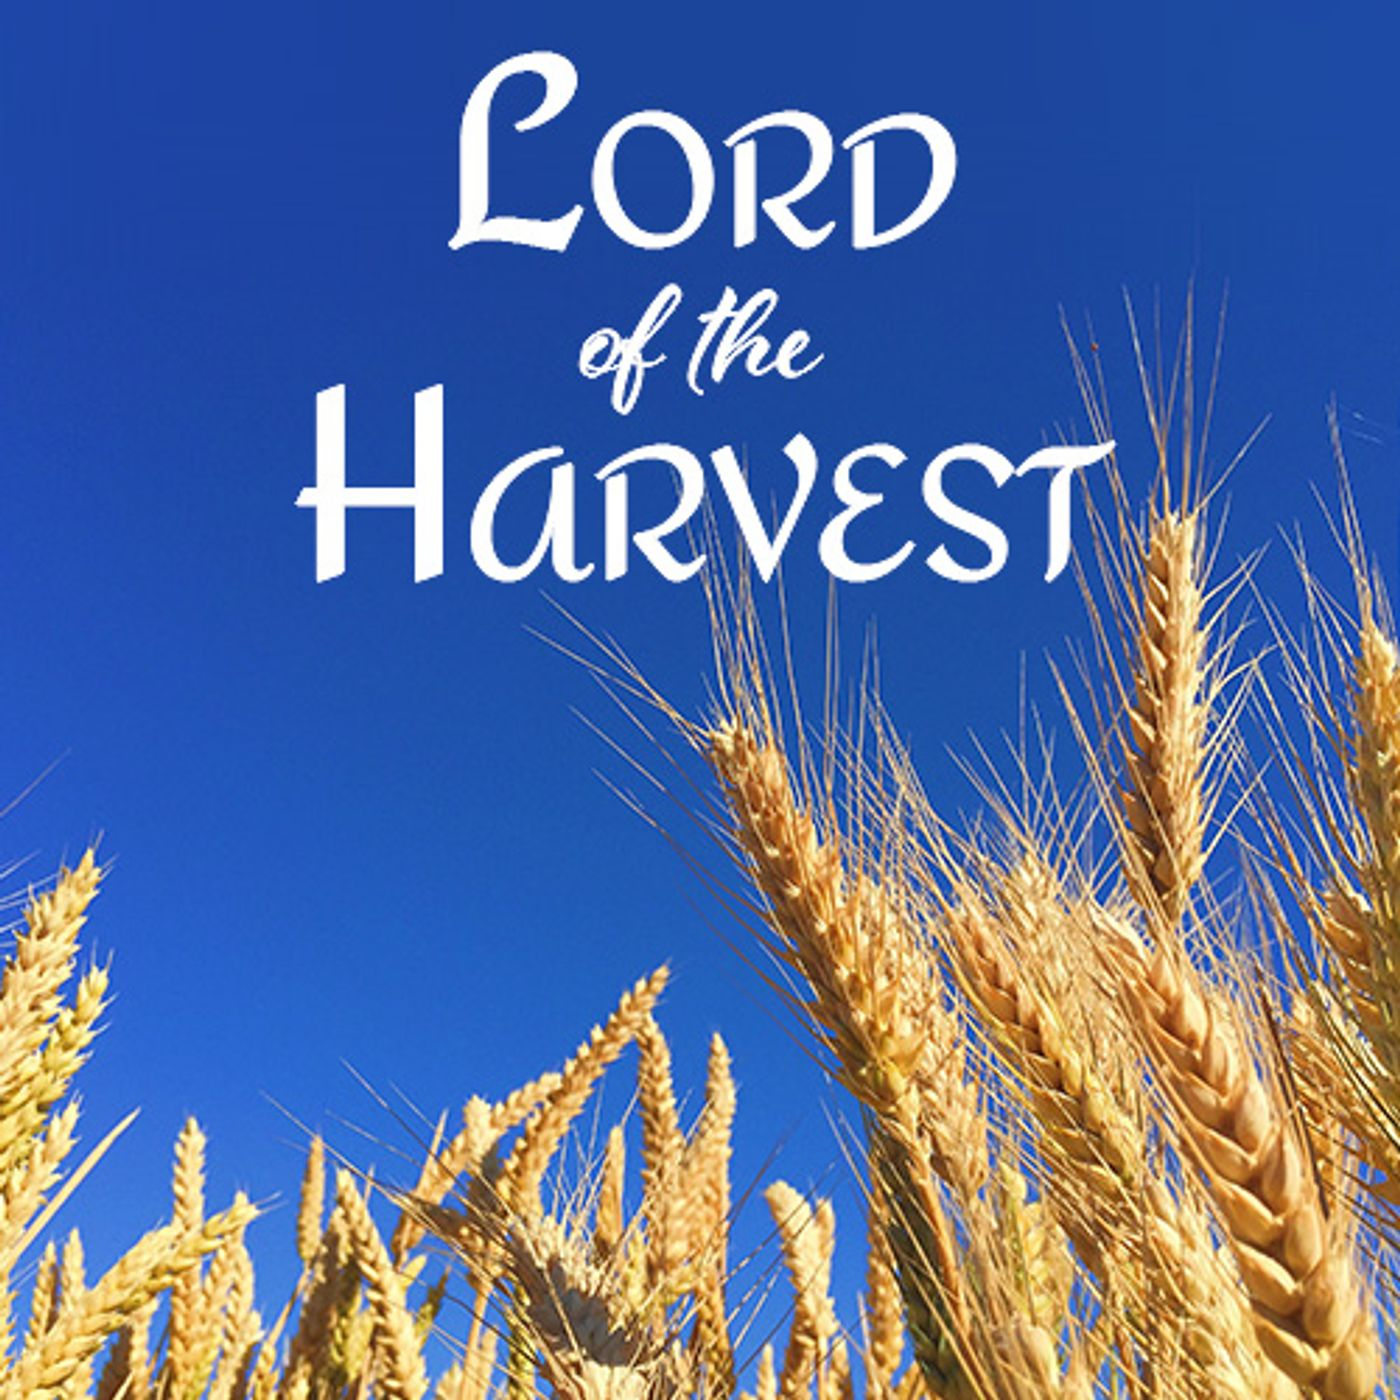 Lord of the Harvest with Extended Relaxing Piano Music